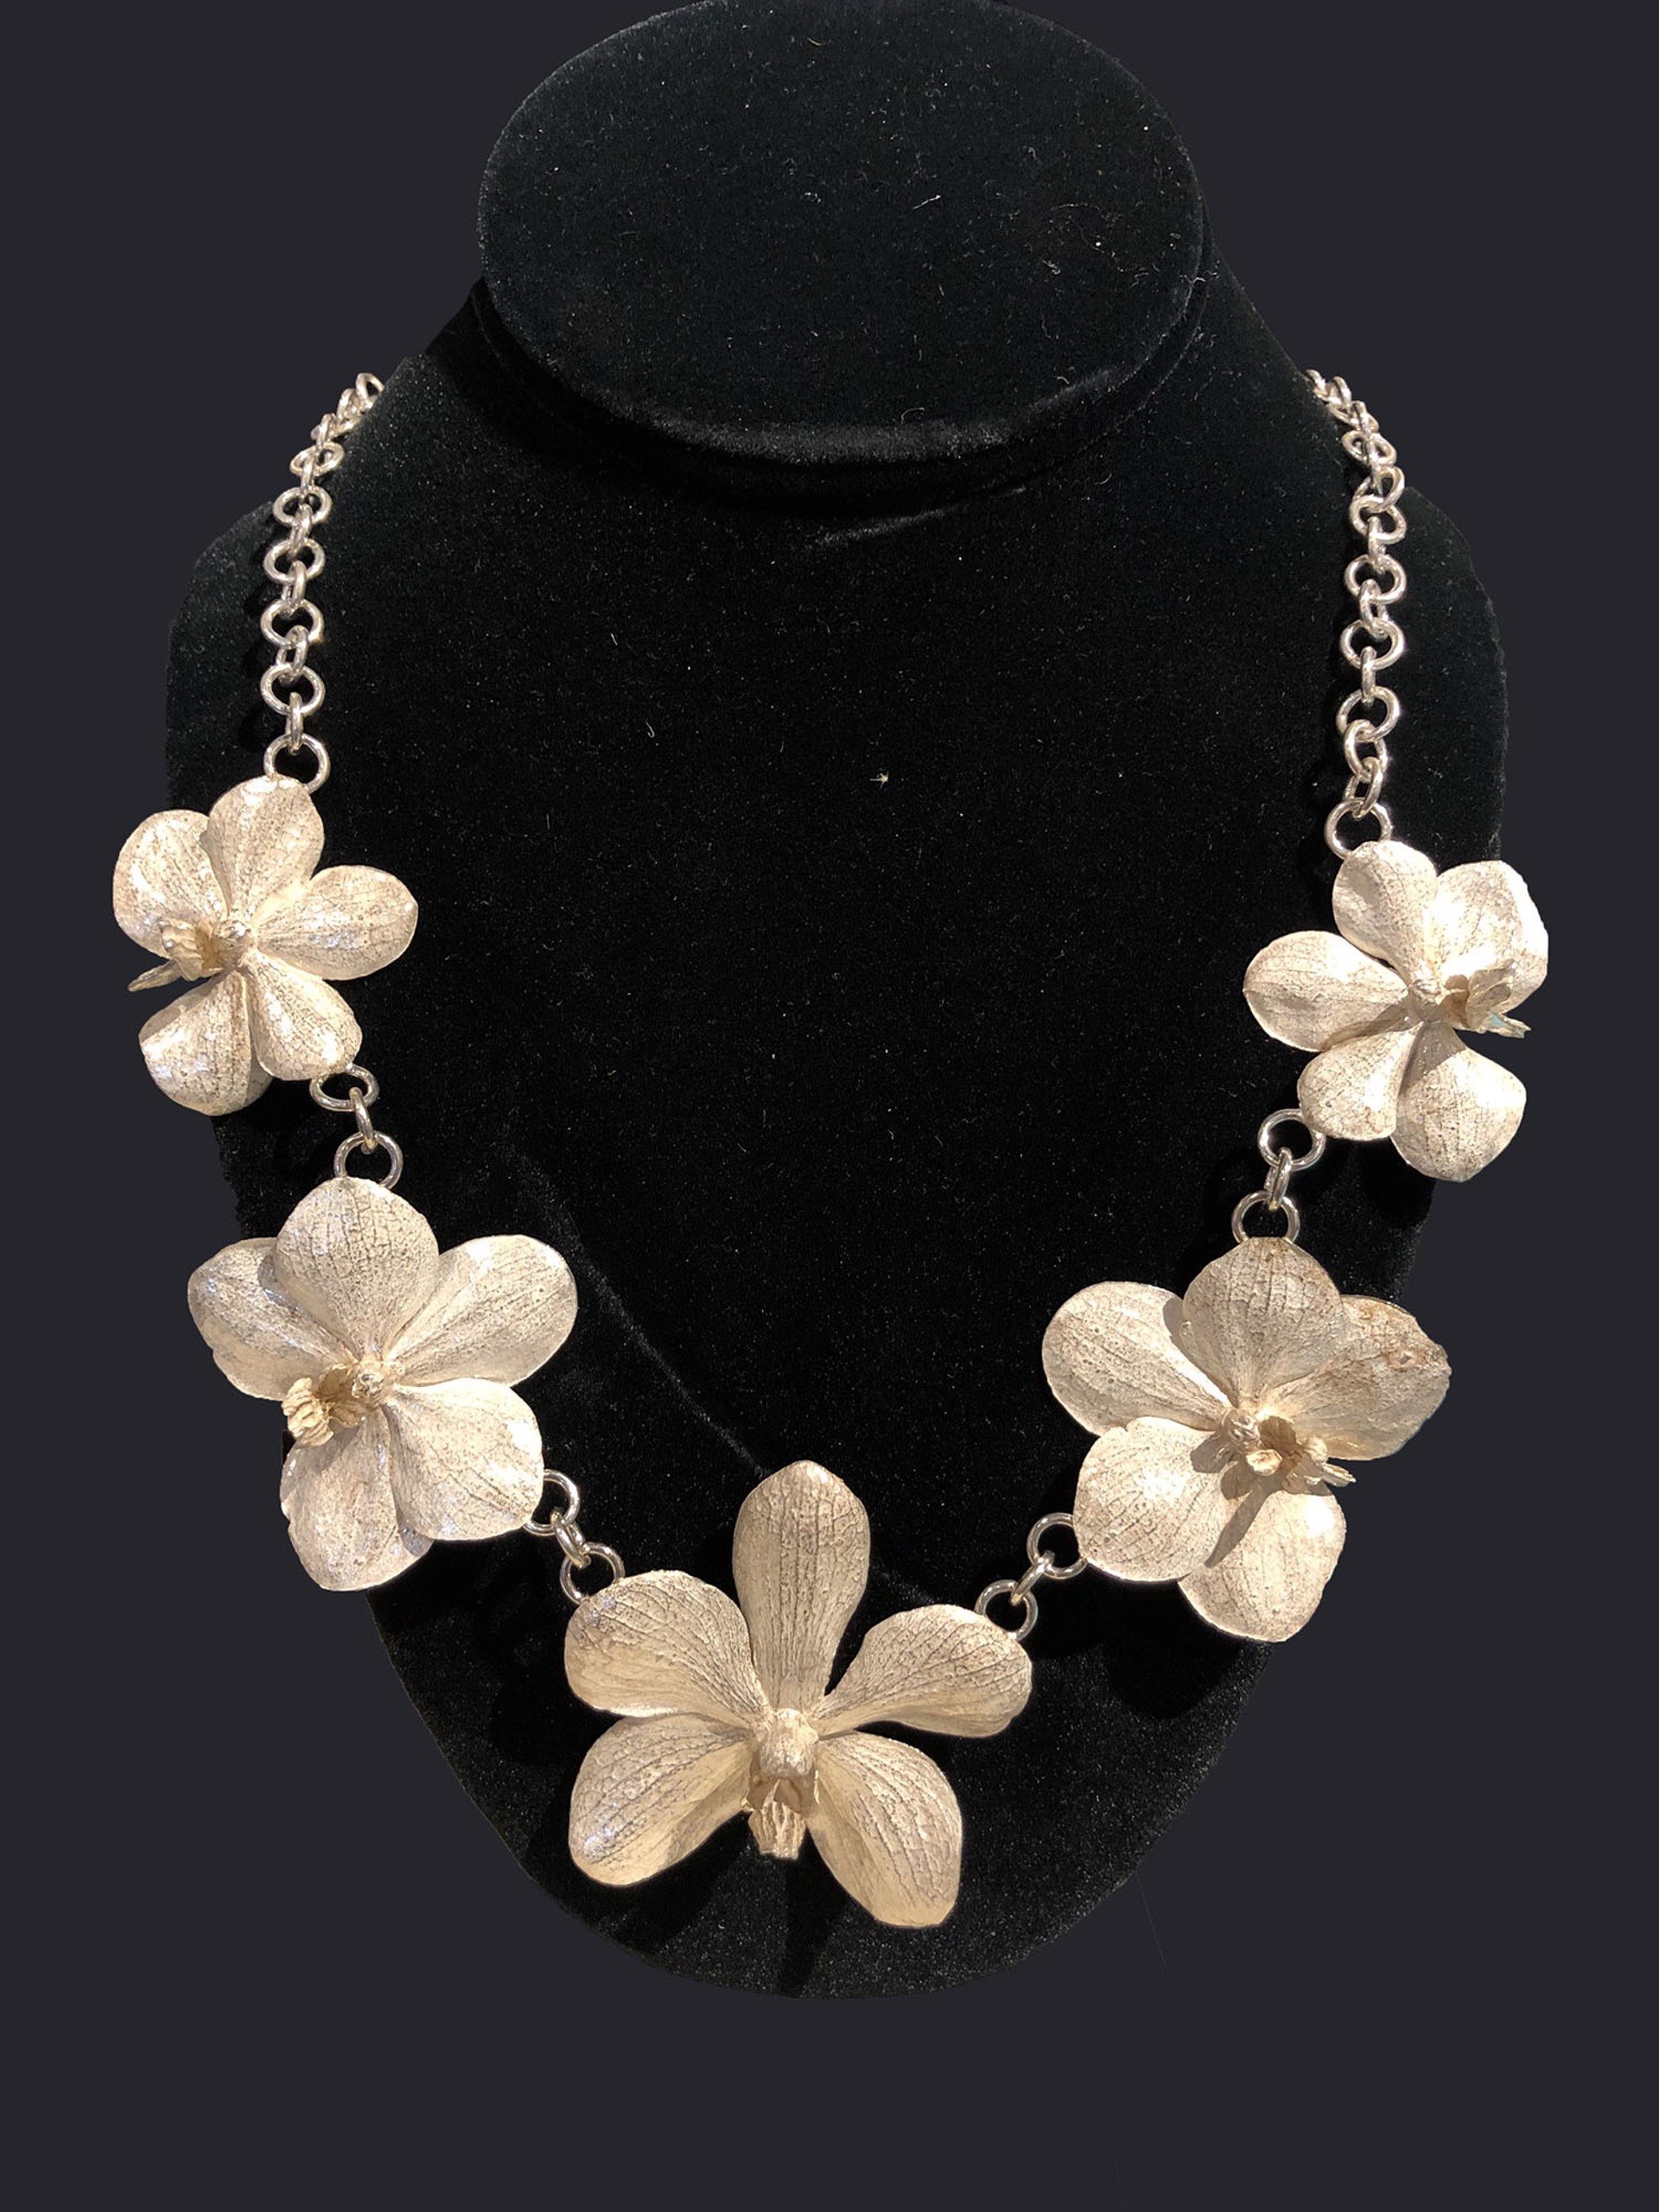 Five LG Orchid Necklace by Wayne Keeth